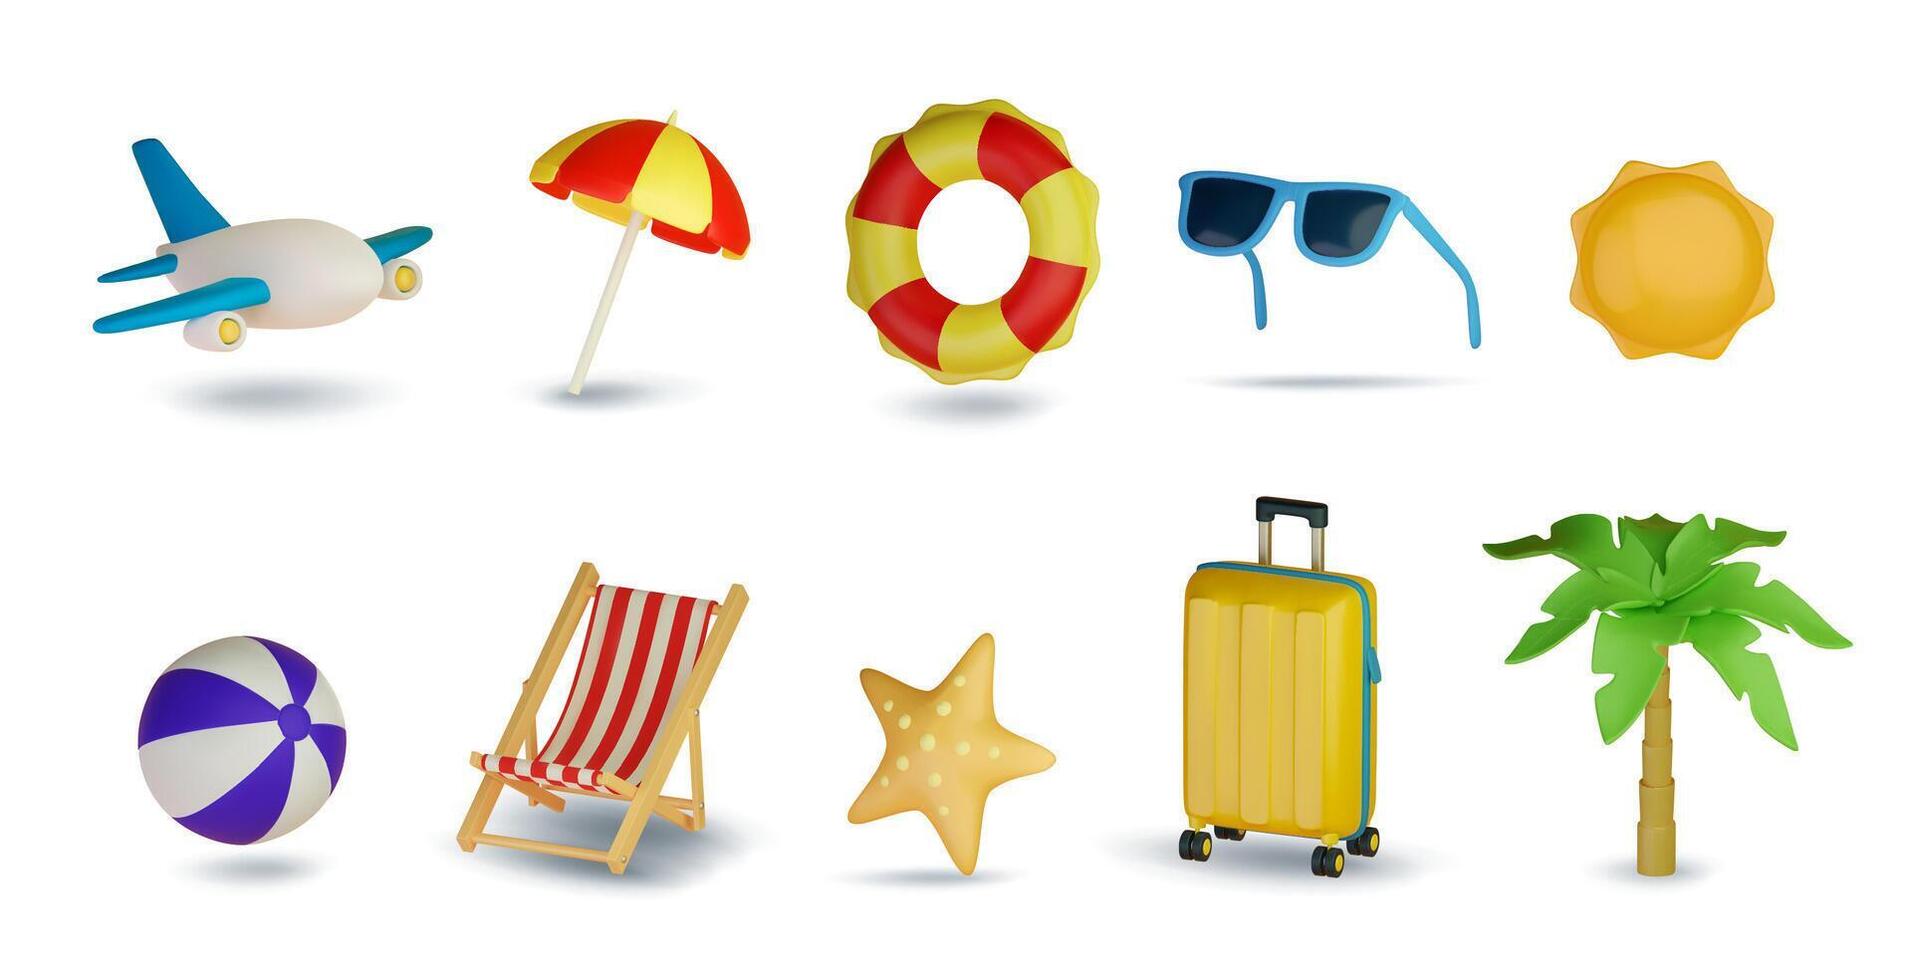 3d set of travel icons on white background. Vacation, airplane, palm tree, sunglasses, lounger, swimming lap, sun, suitcase, ball and umbrella. Vector illustration